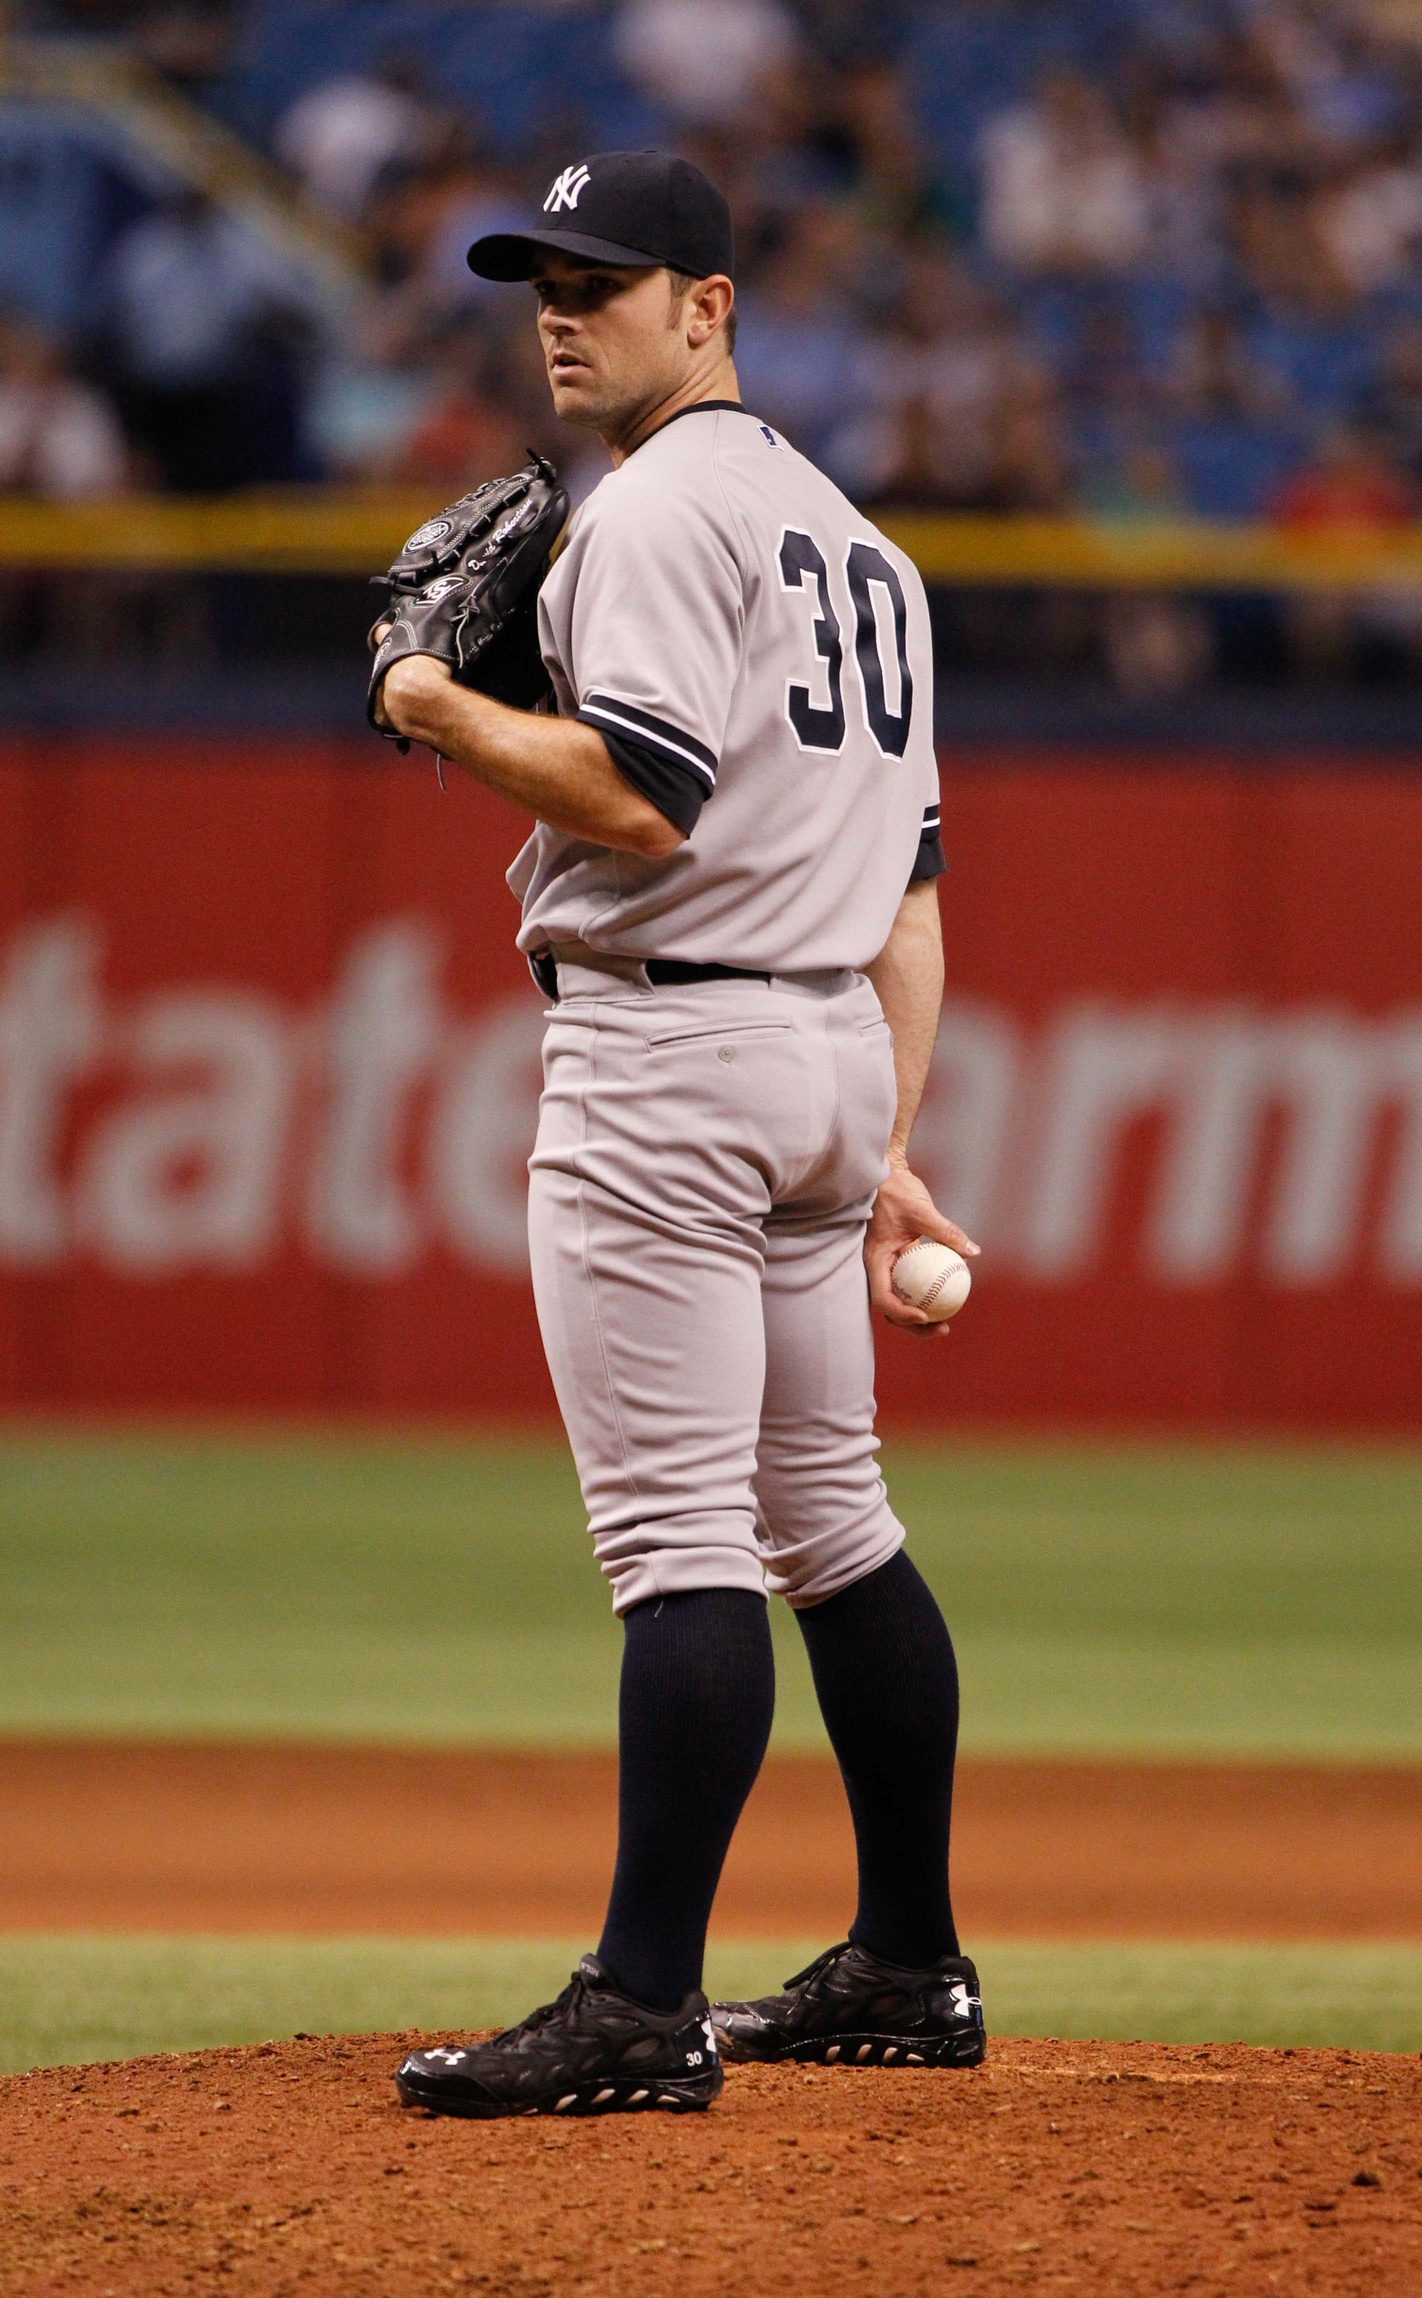 Cincinnati Reds: David Robertson would be a nice addition to the